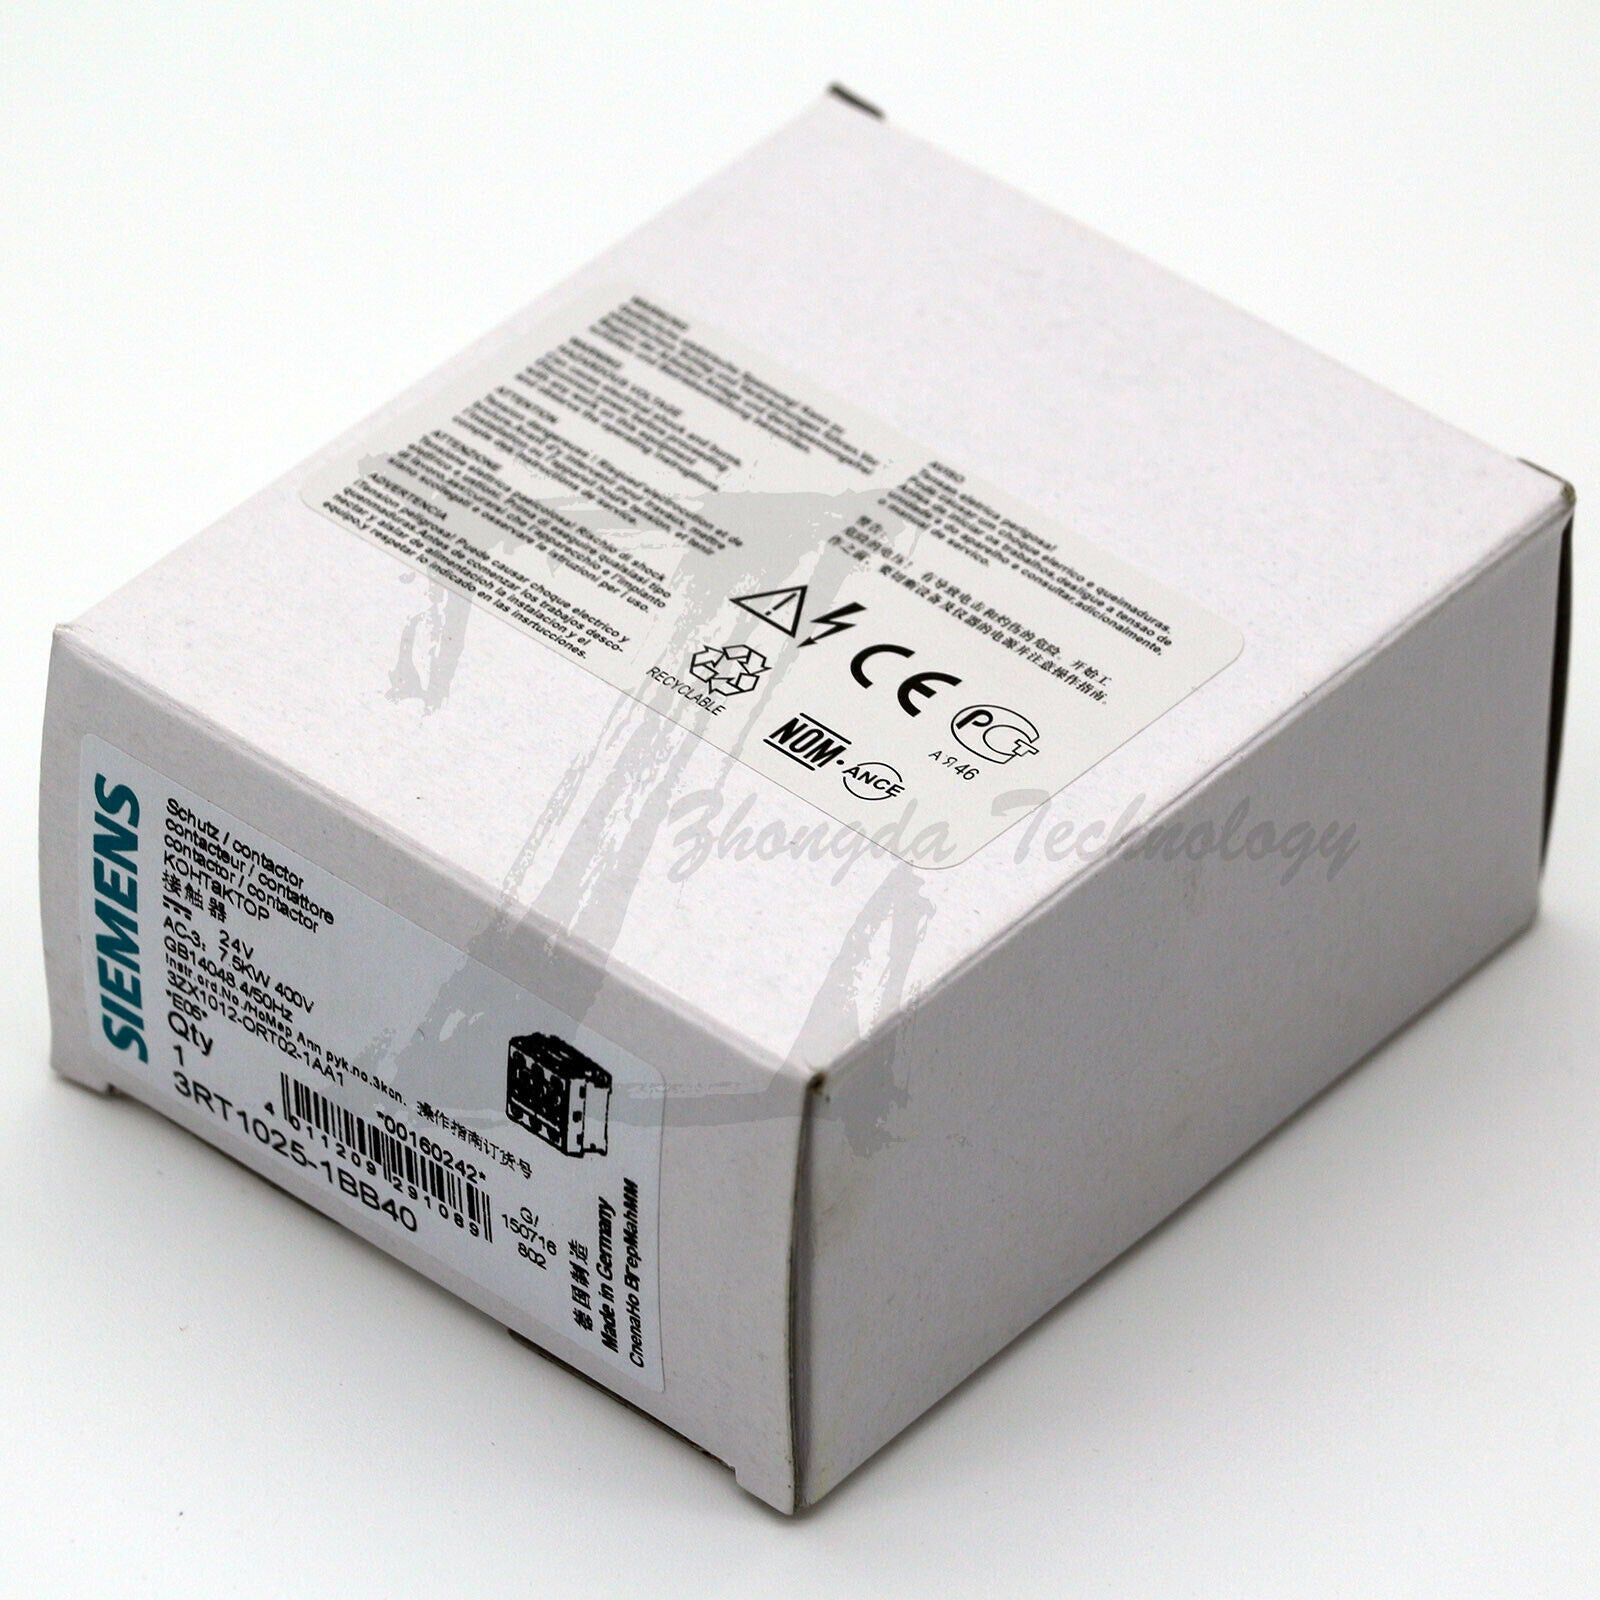 1PC Siemens Contactor 3RT1025-1BB40 (3RT10251BB40) New In Box fast delivery KOEED 1, 90%, import_2020_10_10_031751, Other, Siemens